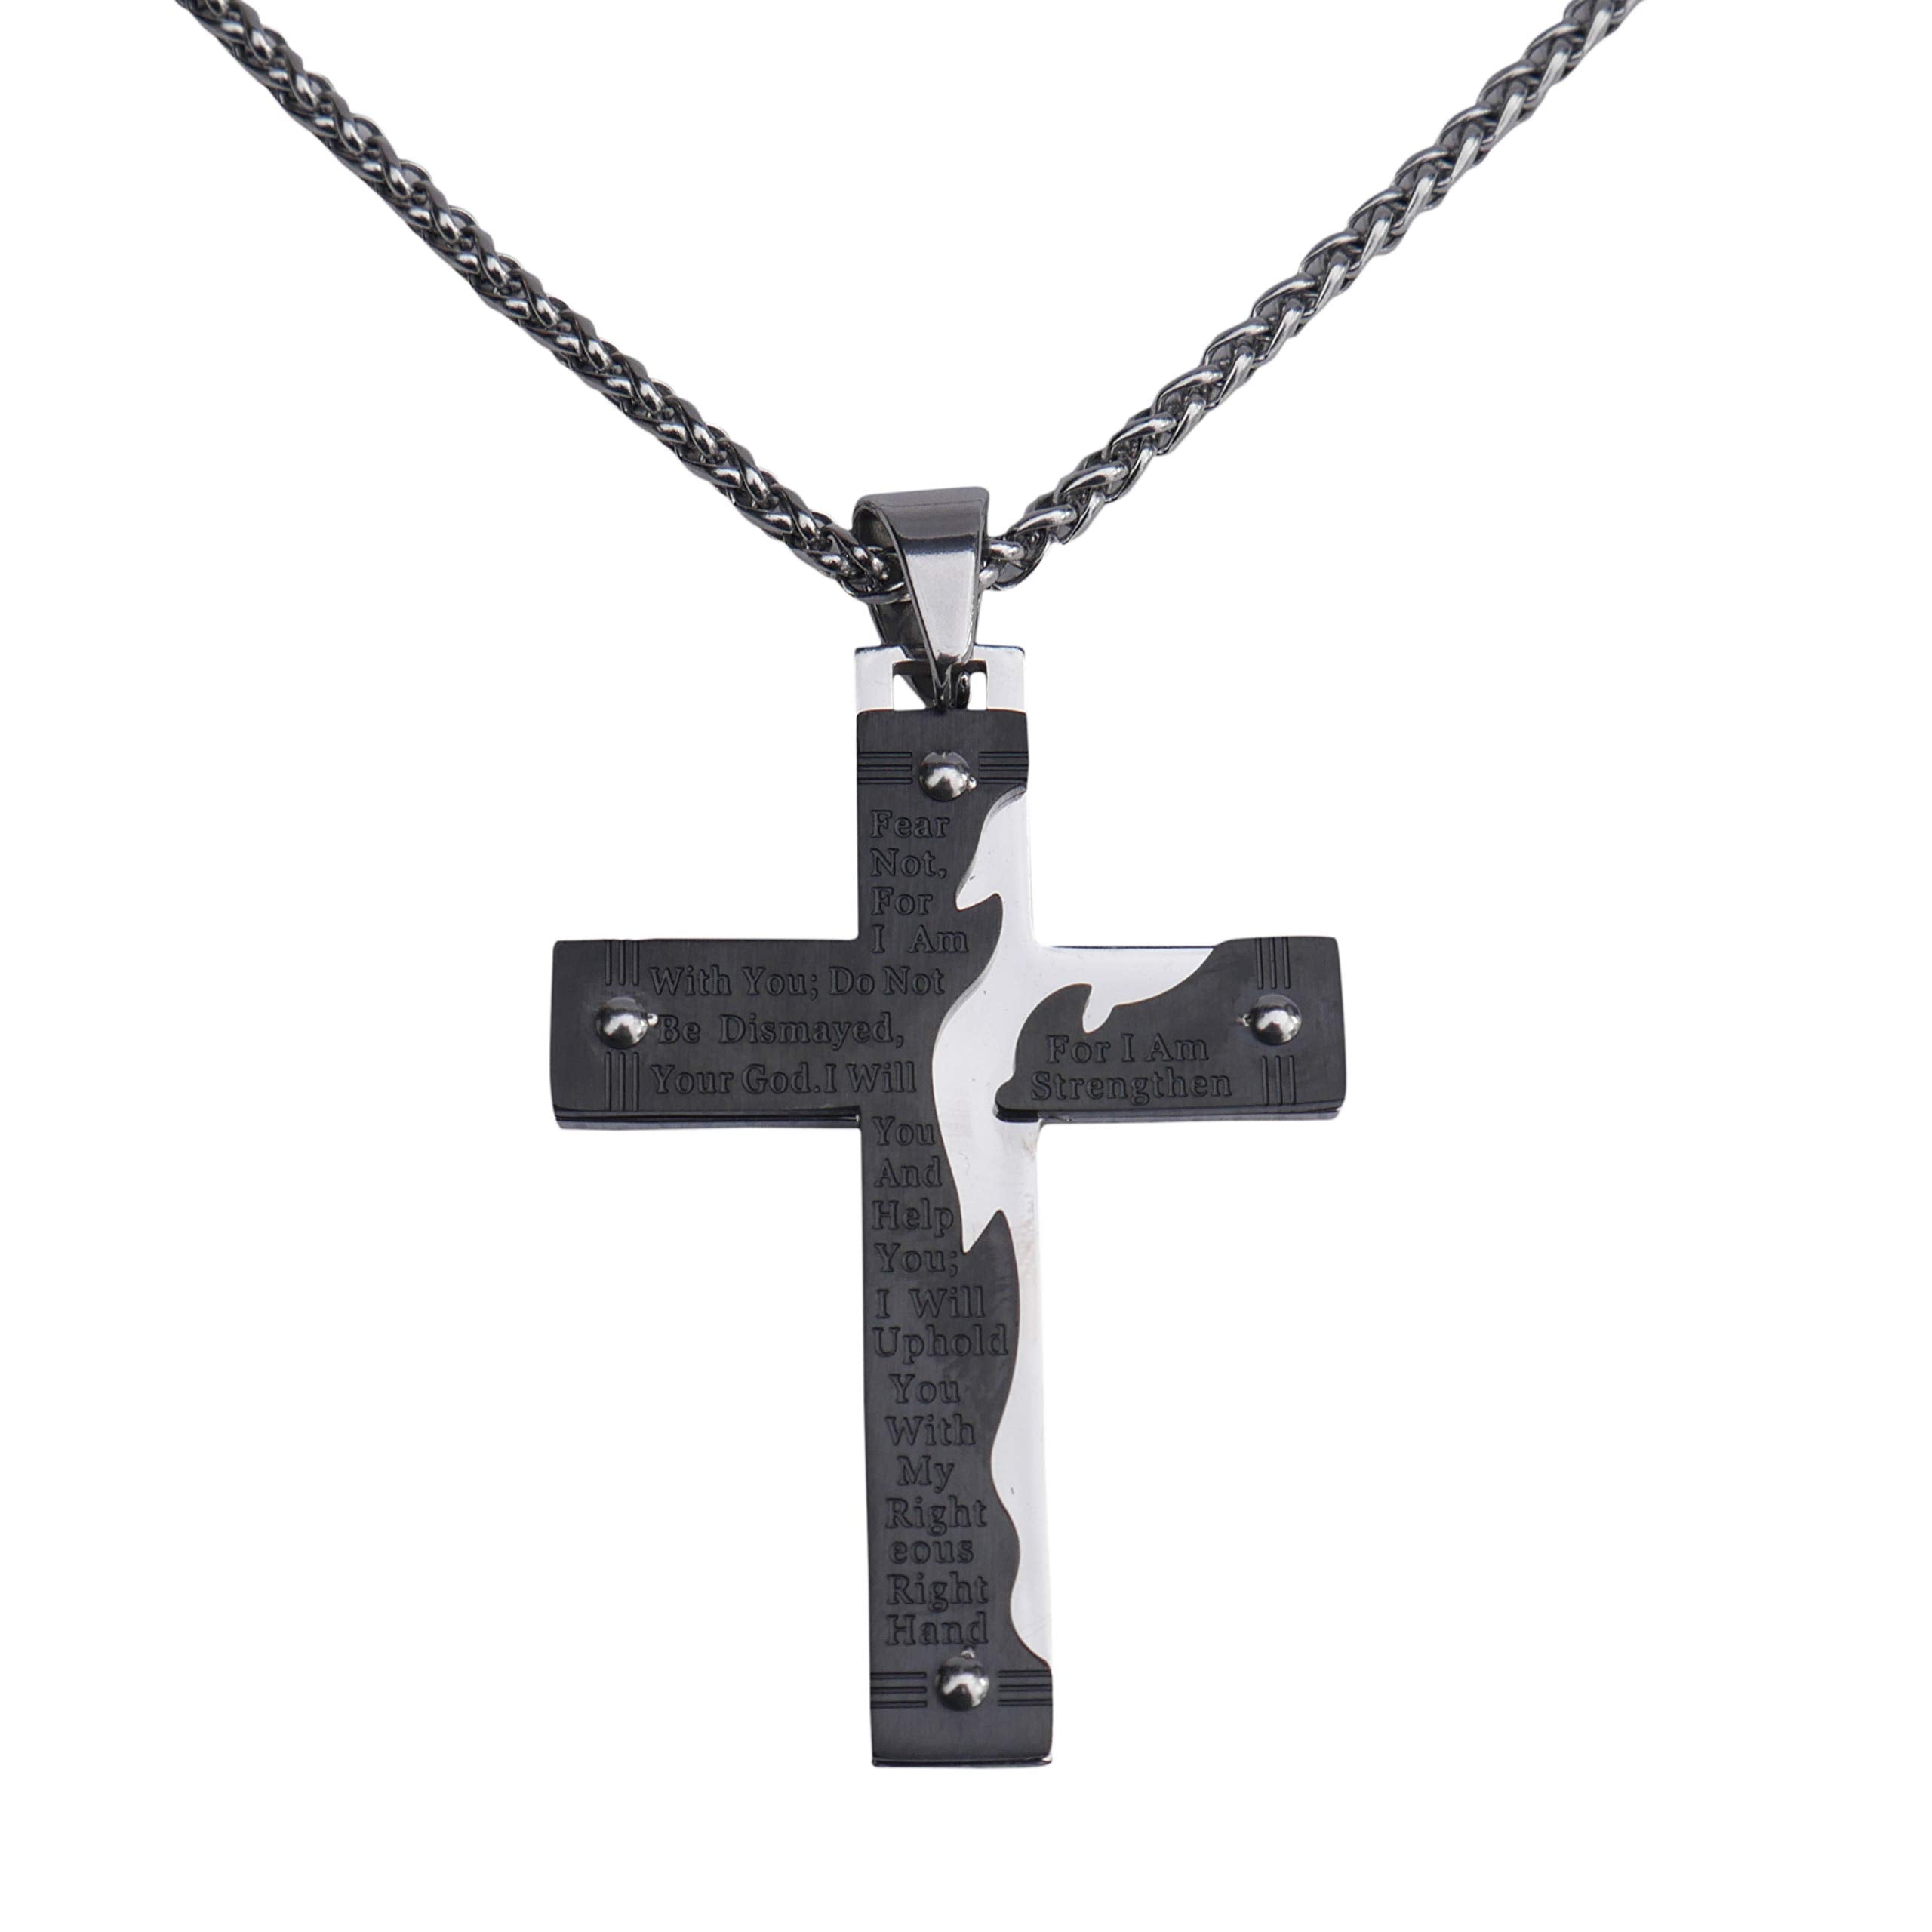 Epiphaneia Men's Fear Not Isaiah 41v10 Stainless Steel Cross Necklace Black & Silver - Mens Jewelry Cross Necklaces Christian Religious Gifts Christians Gift for Men - Birthday for Dad, Father's Day